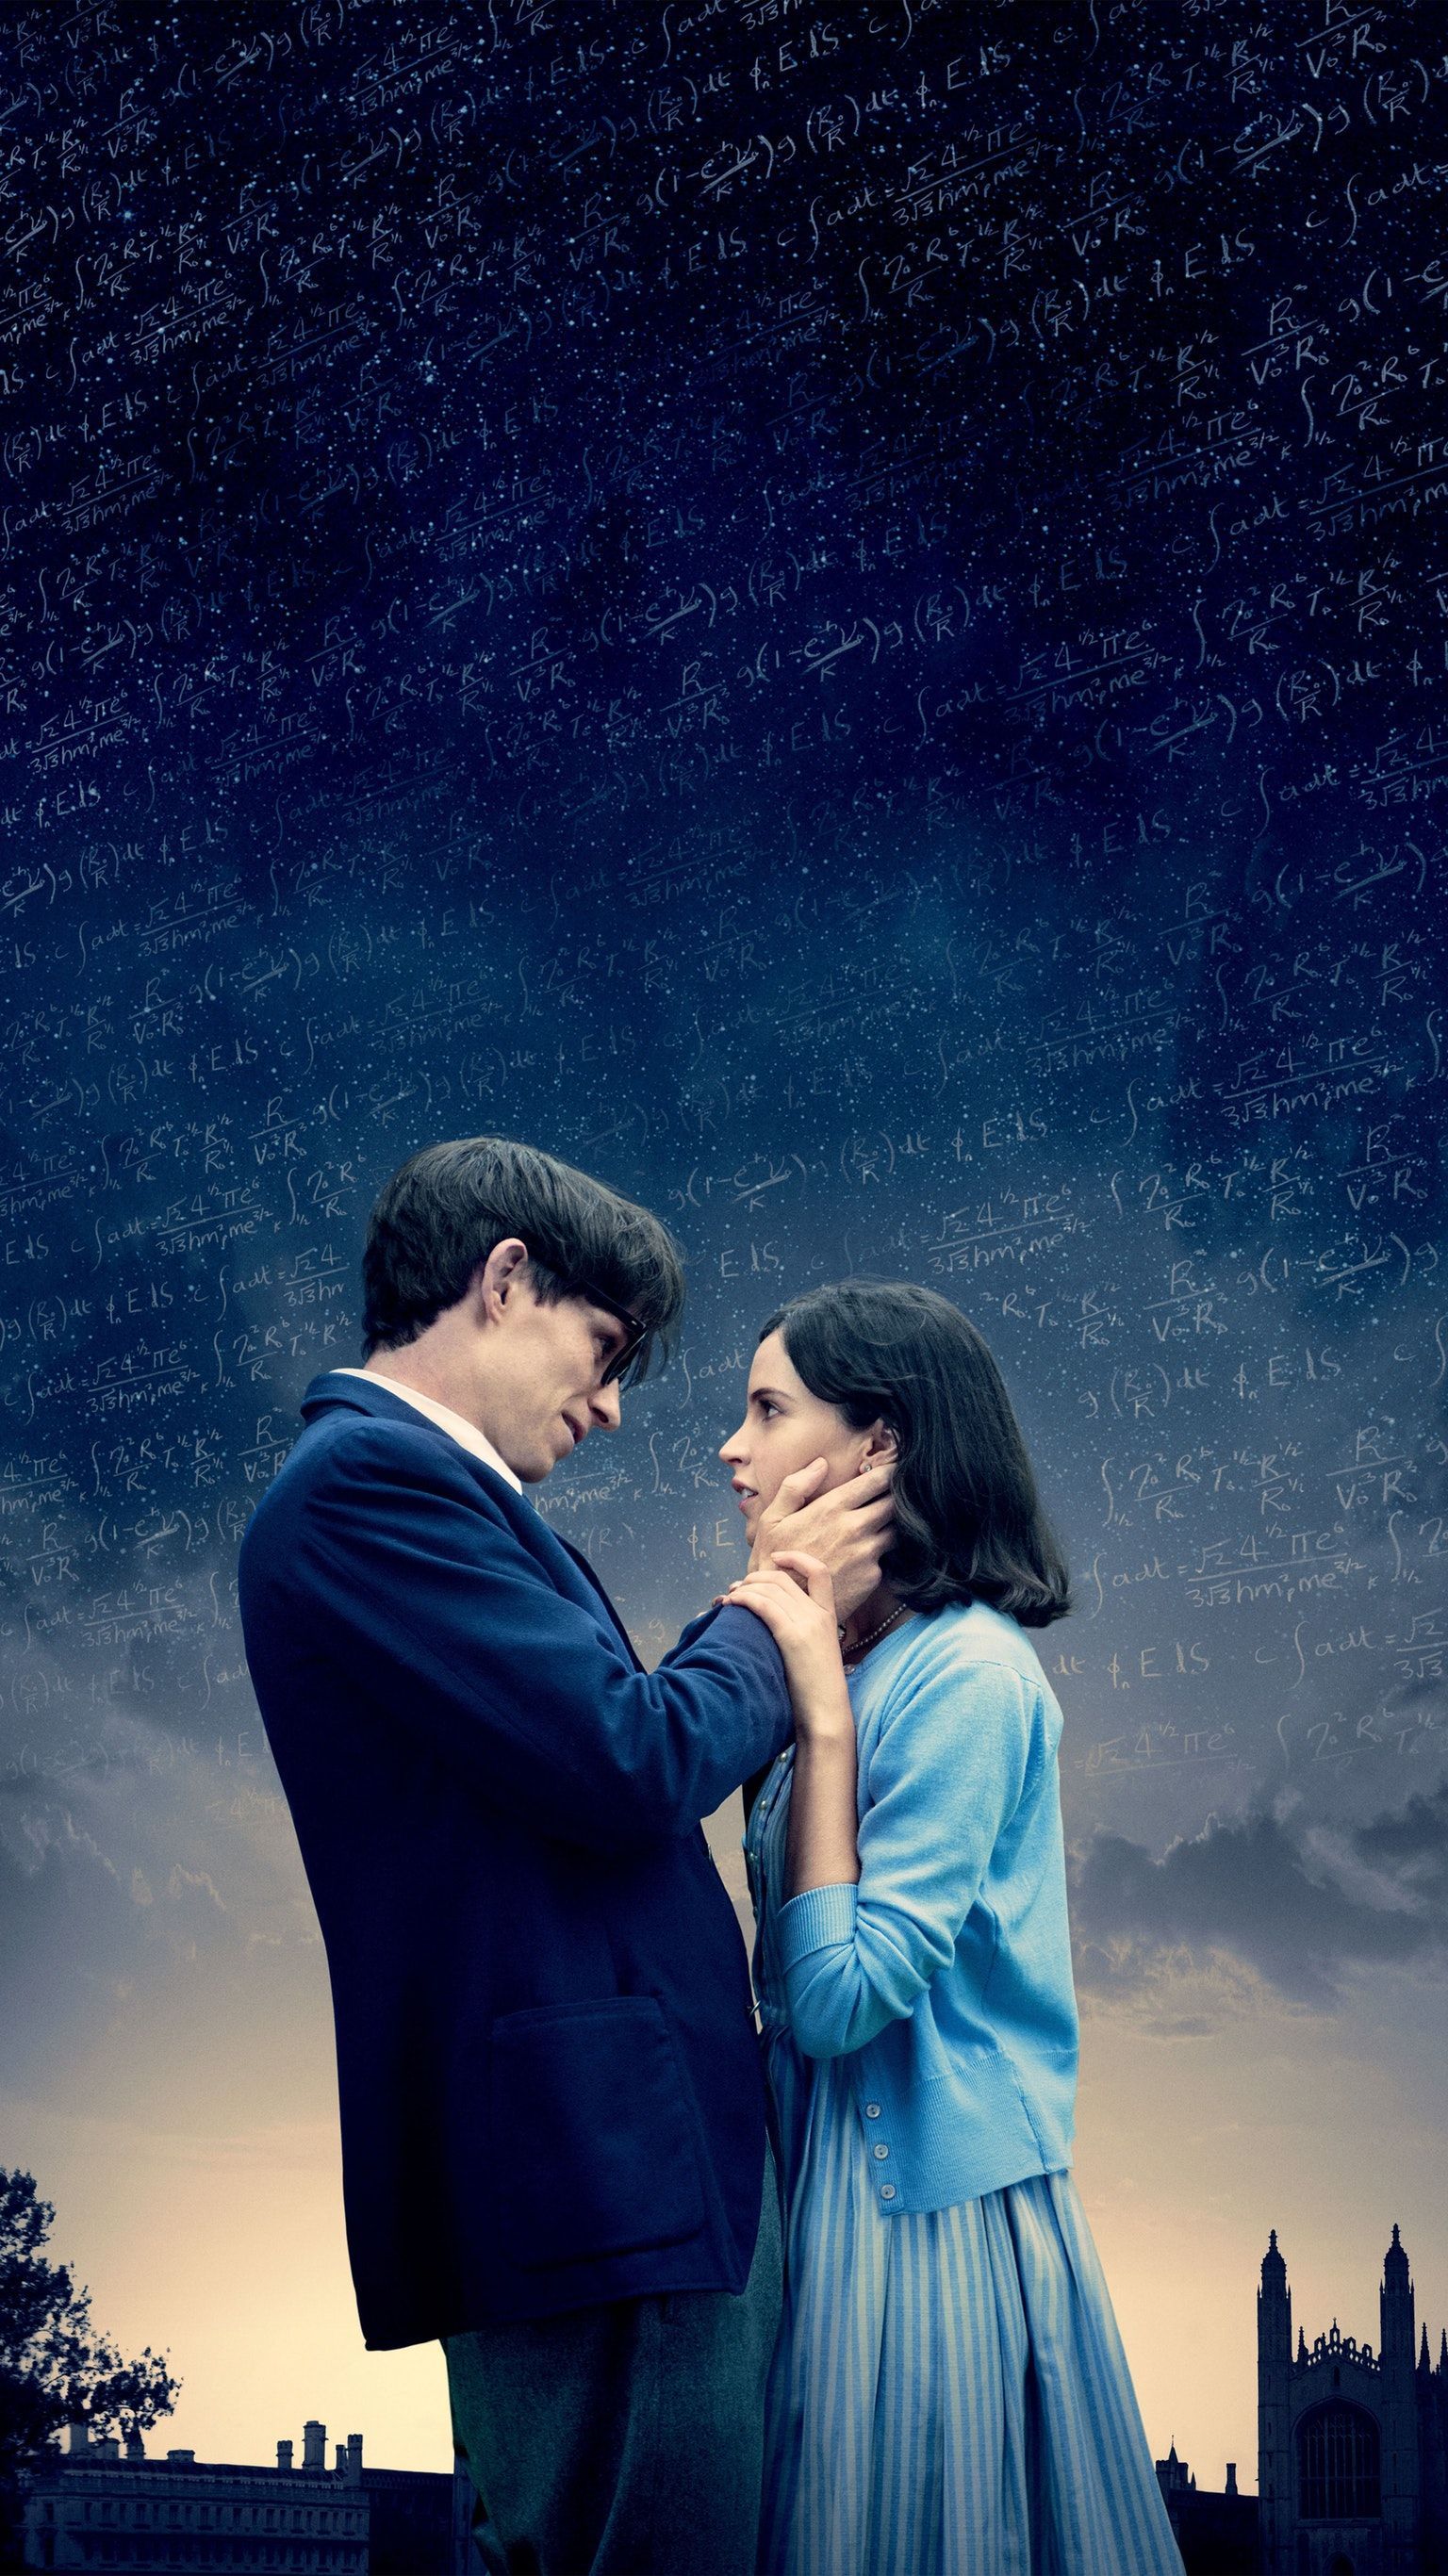 The Theory of Everything (2014) Phone Wallpaper. Moviemania. Theories, Movie posters, Romantic films